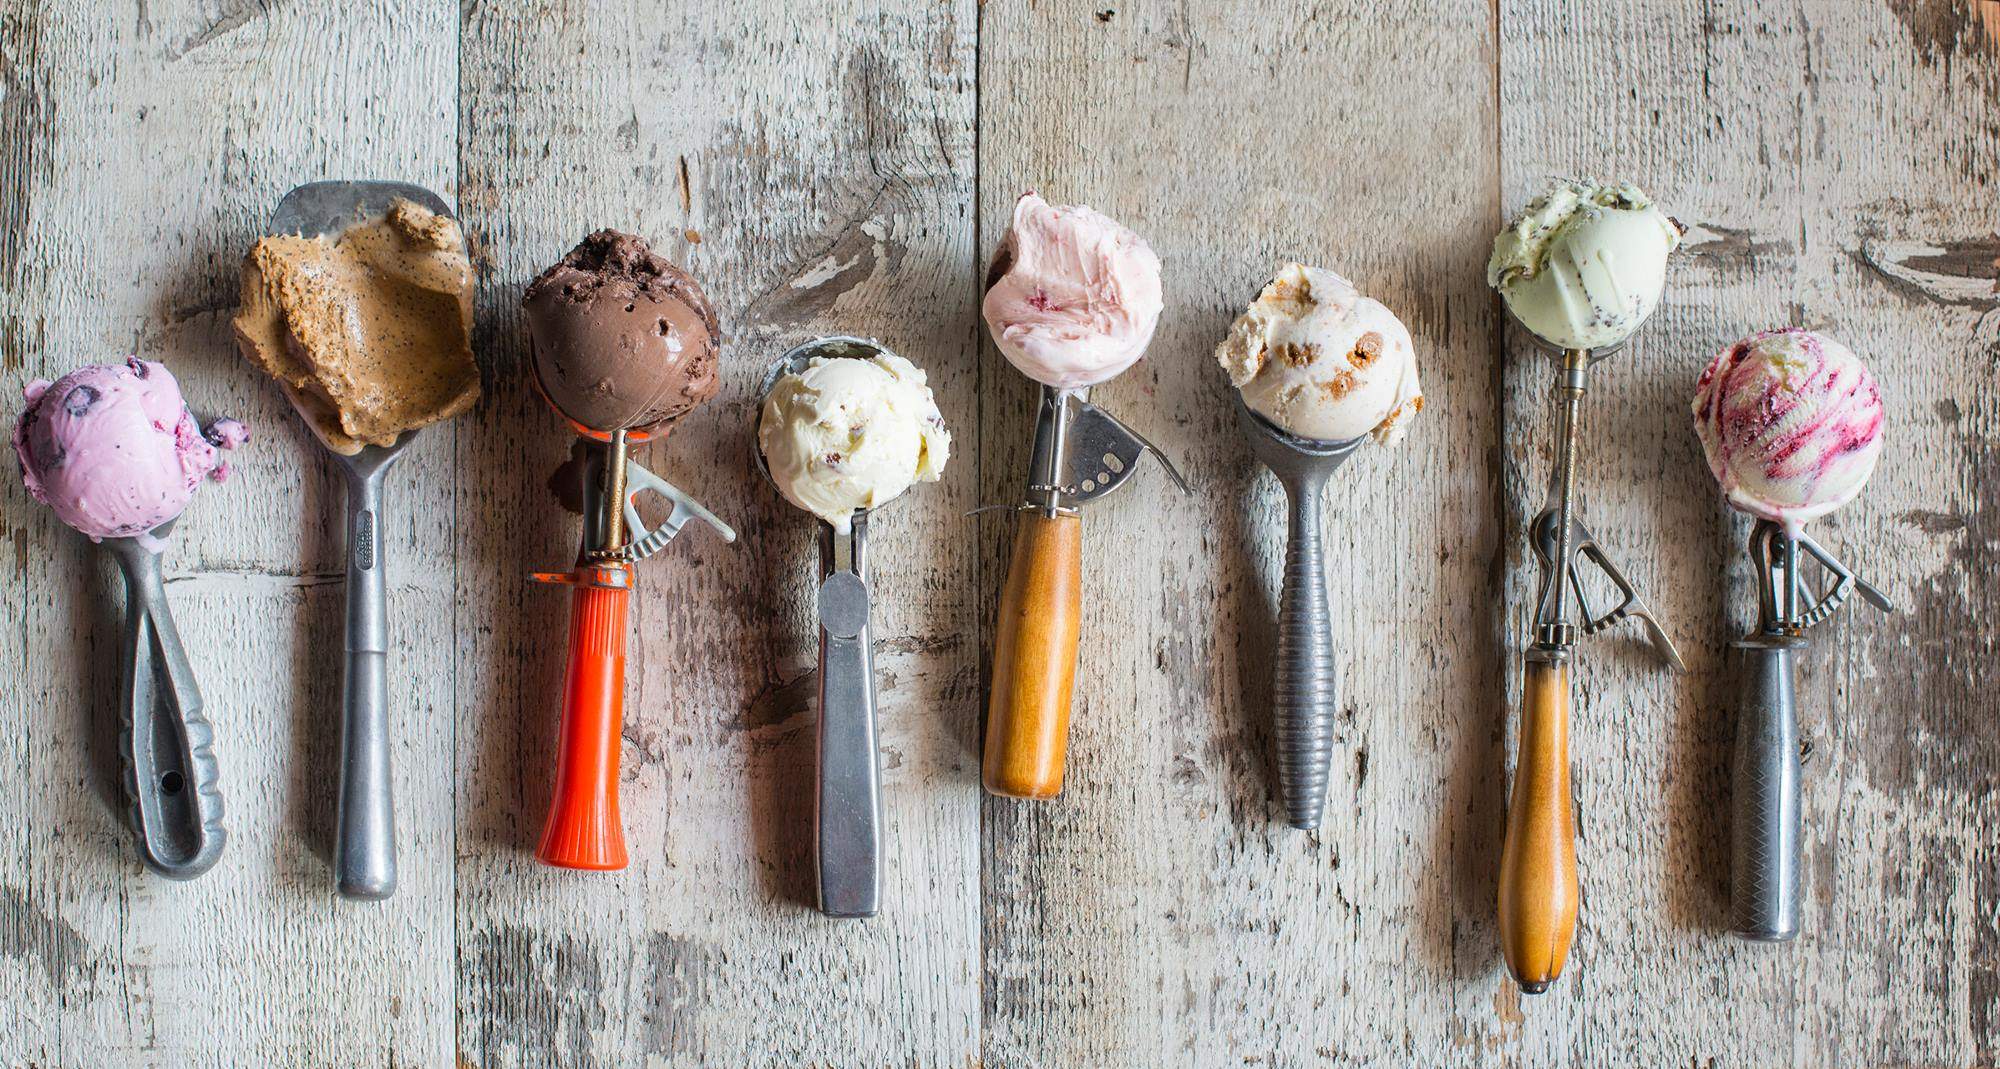 Cool Off From the LA Heat With 5 Delicious Ice Cream Shops!